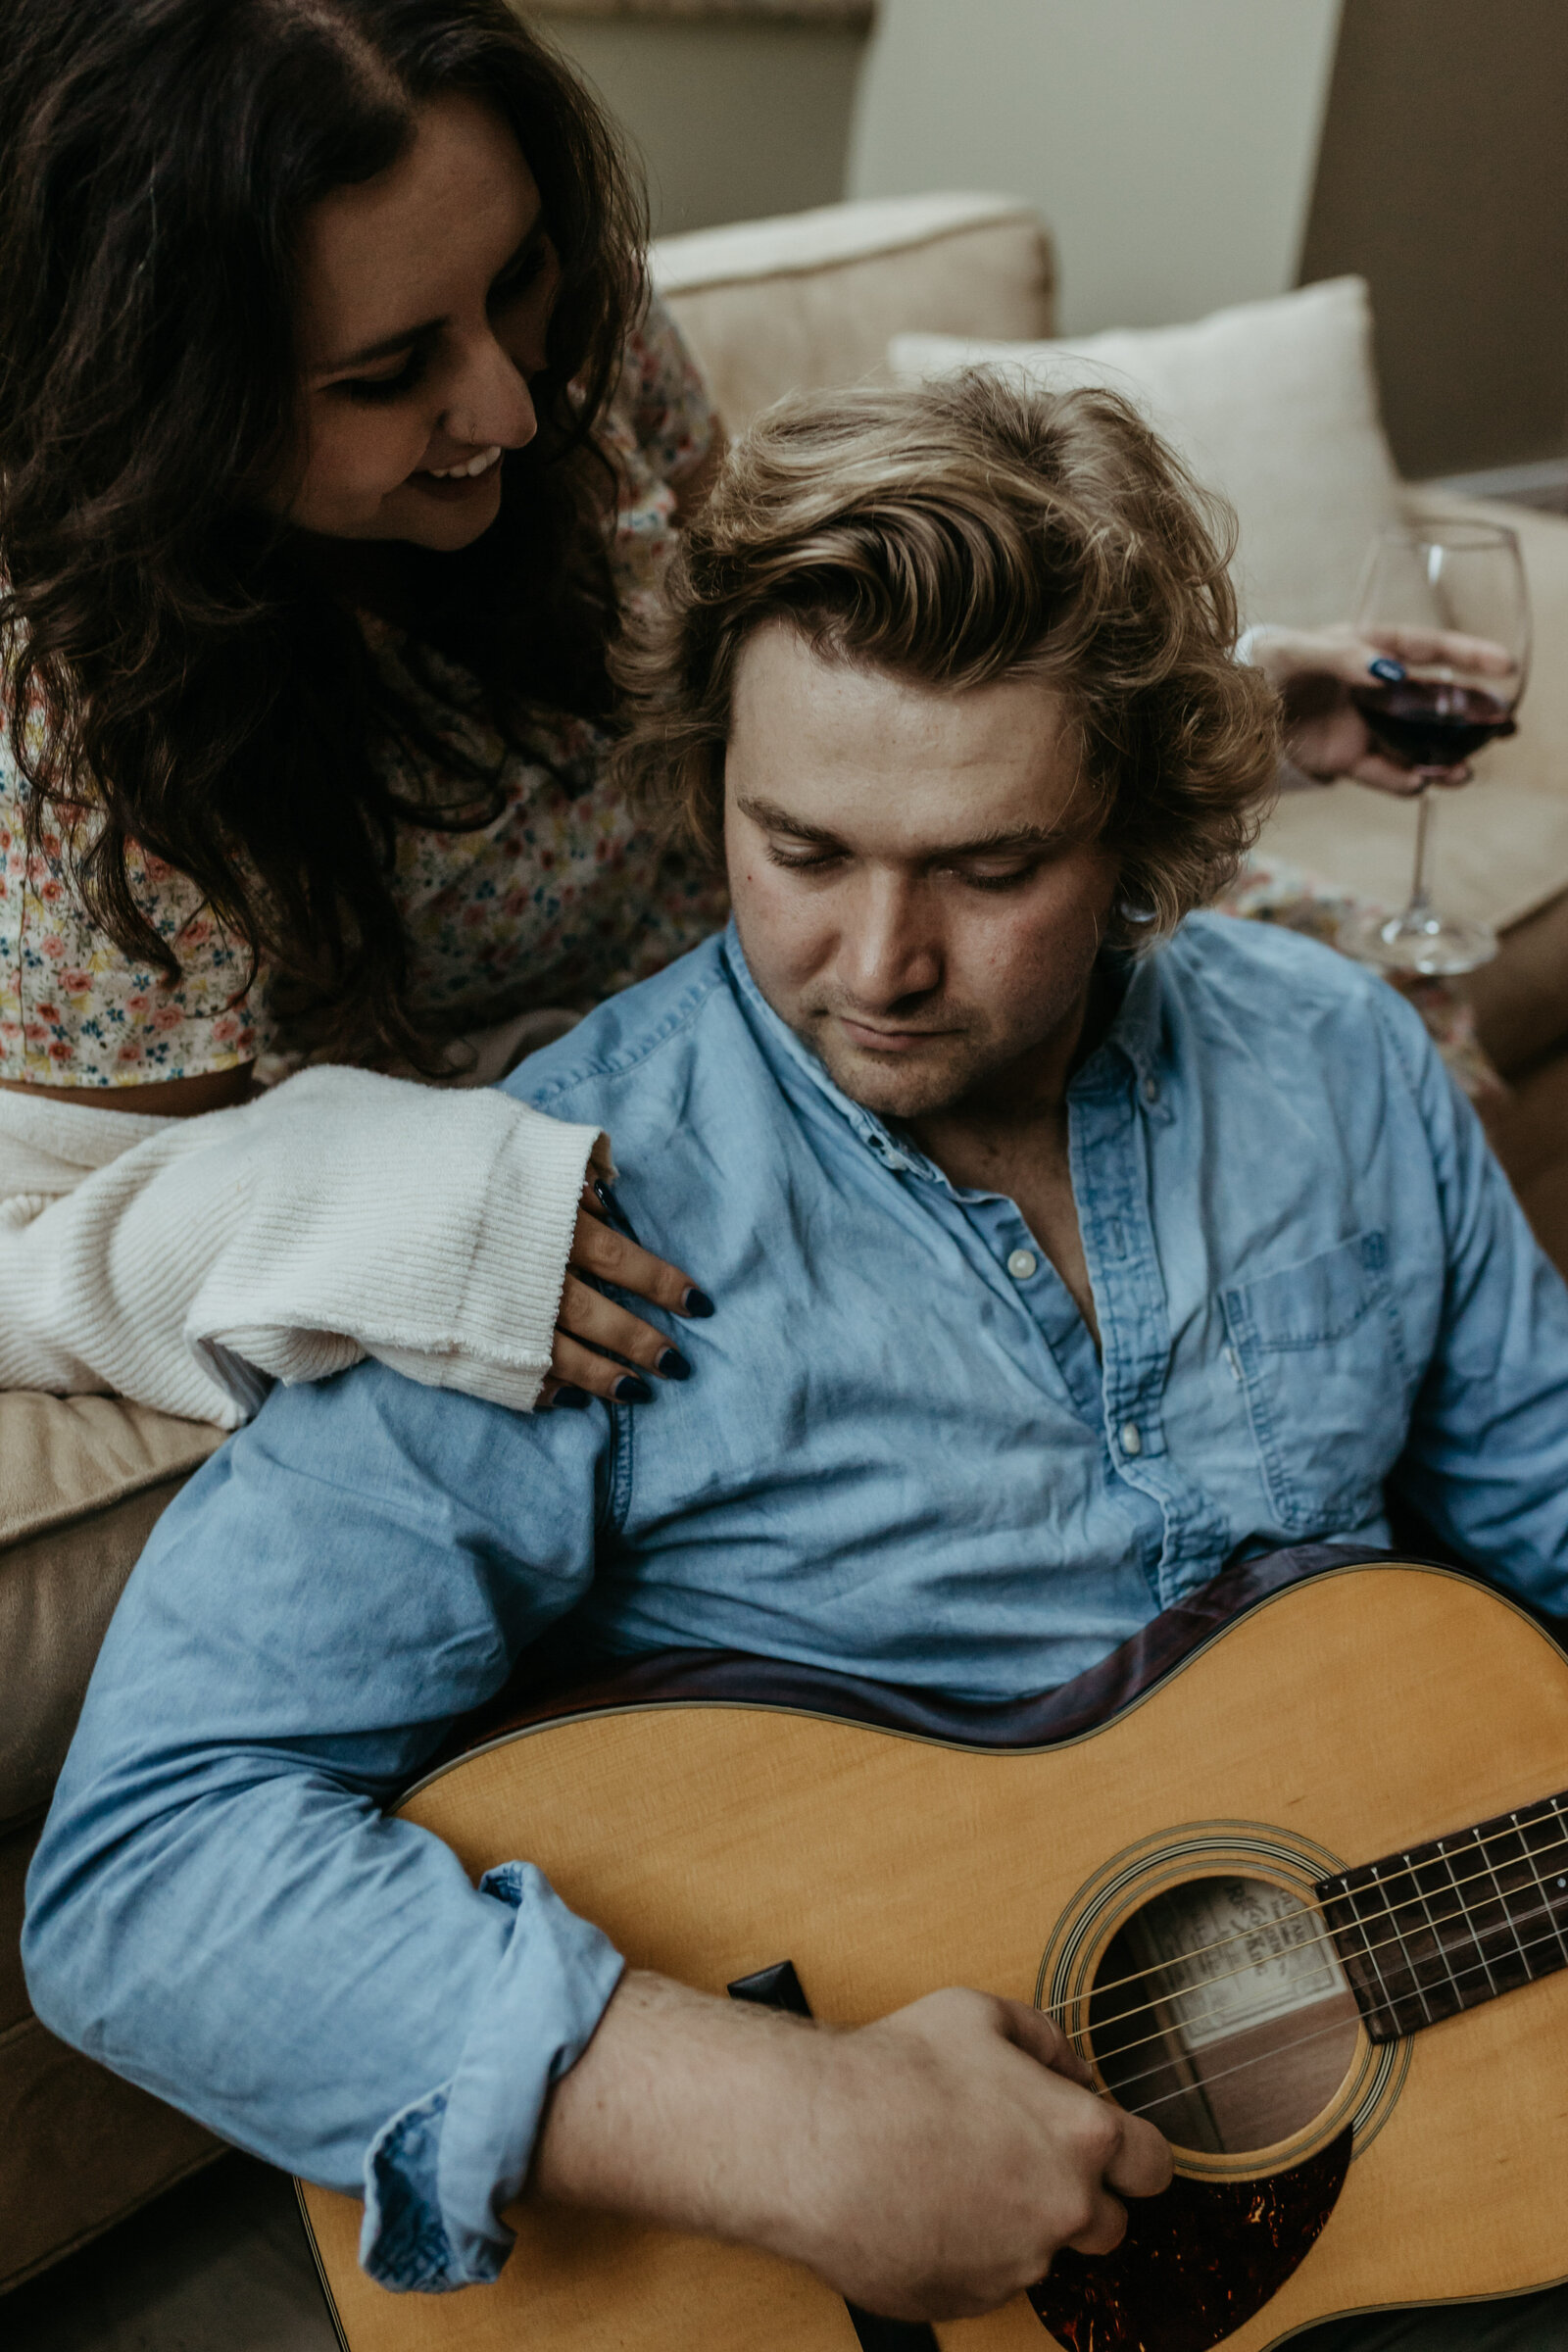 A man and woman sit together with a guitar and wine